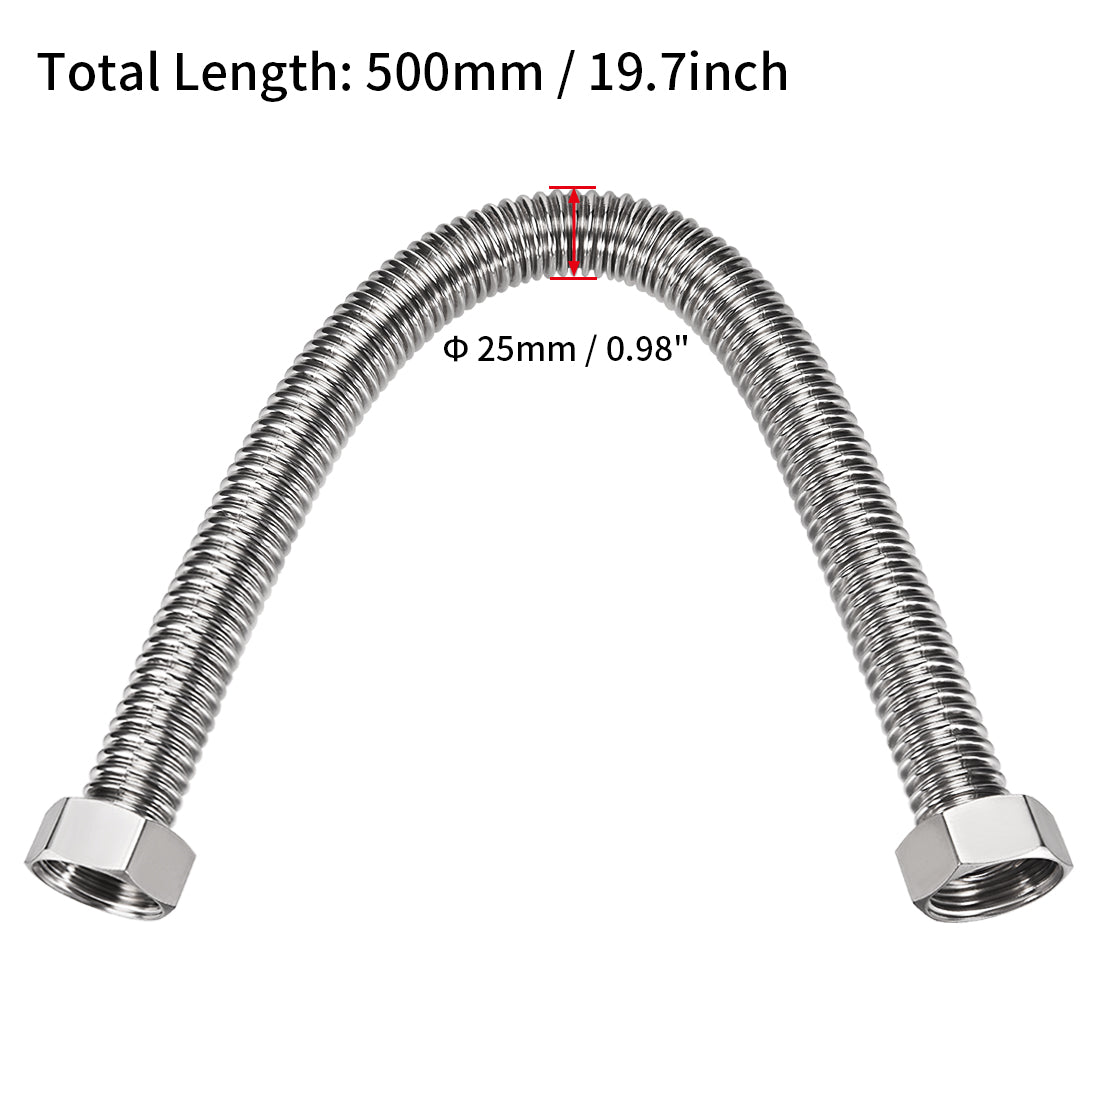 uxcell Uxcell Corrugated Stainless Steel Flexible Water Line 19.7inch Long G1 Female Threaded Connector with Washer